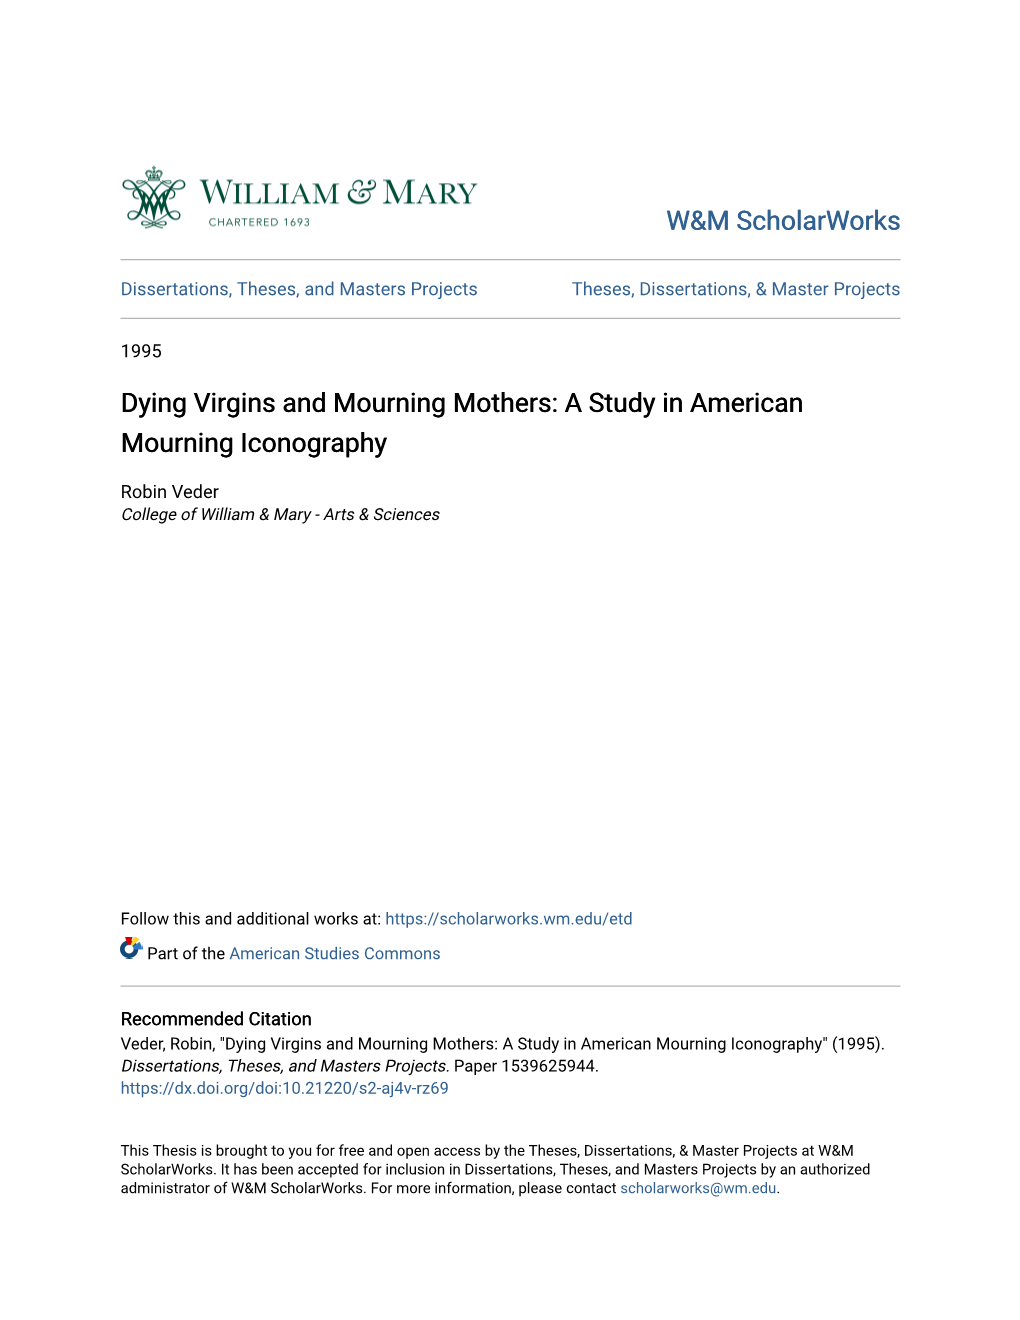 Dying Virgins and Mourning Mothers: a Study in American Mourning Iconography